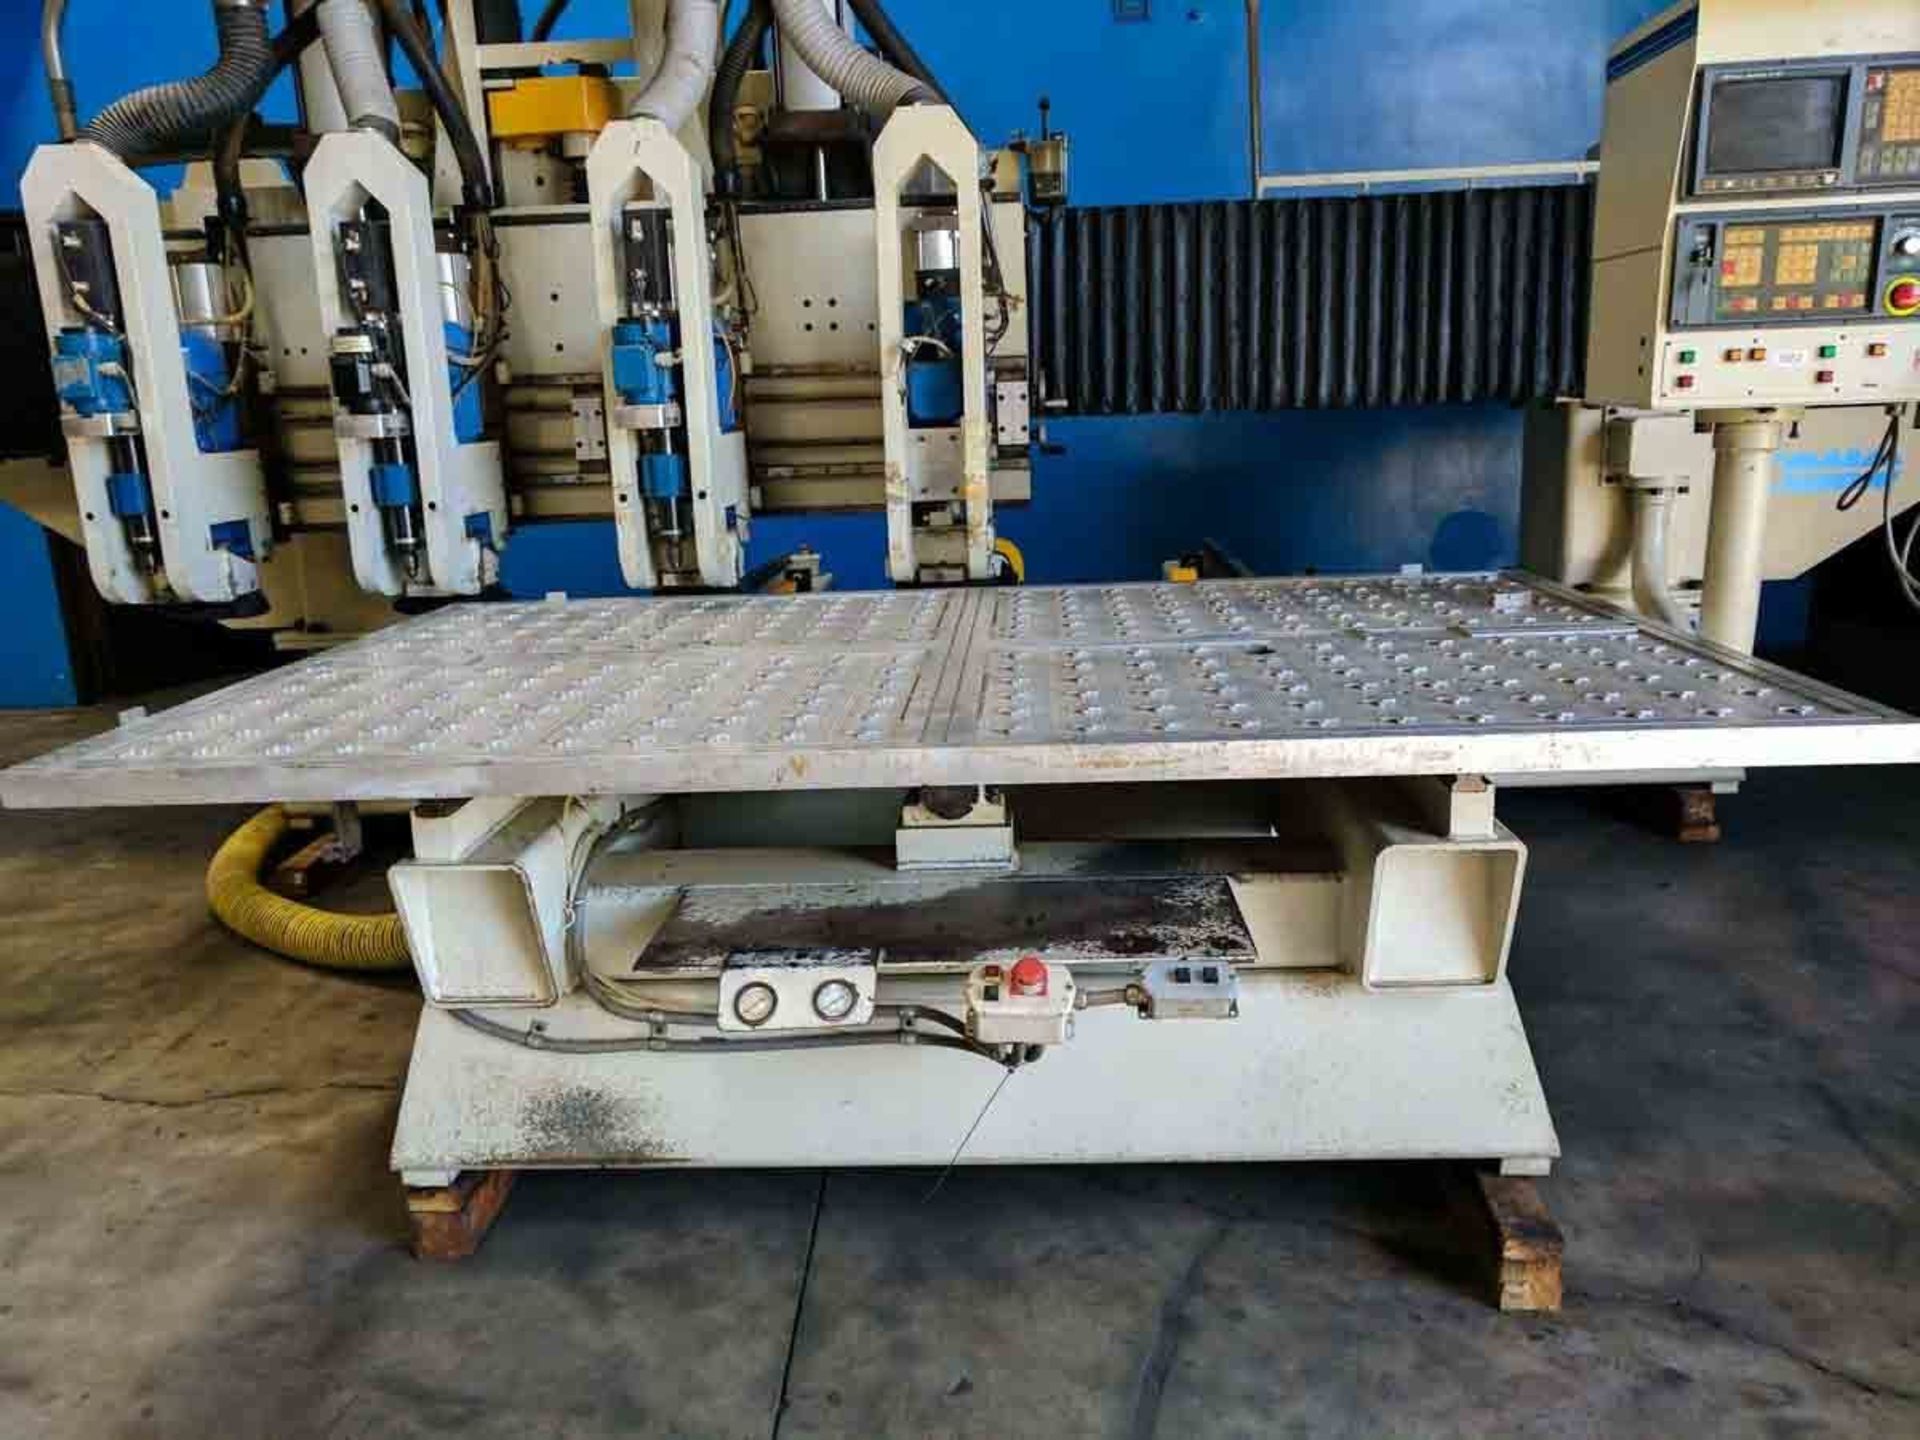 Komo VR805Q Fanuc CNC Metal Router 3 Axis 4 Spindle 96" x 60" Sheet Size - Located In: Huntington - Image 19 of 24